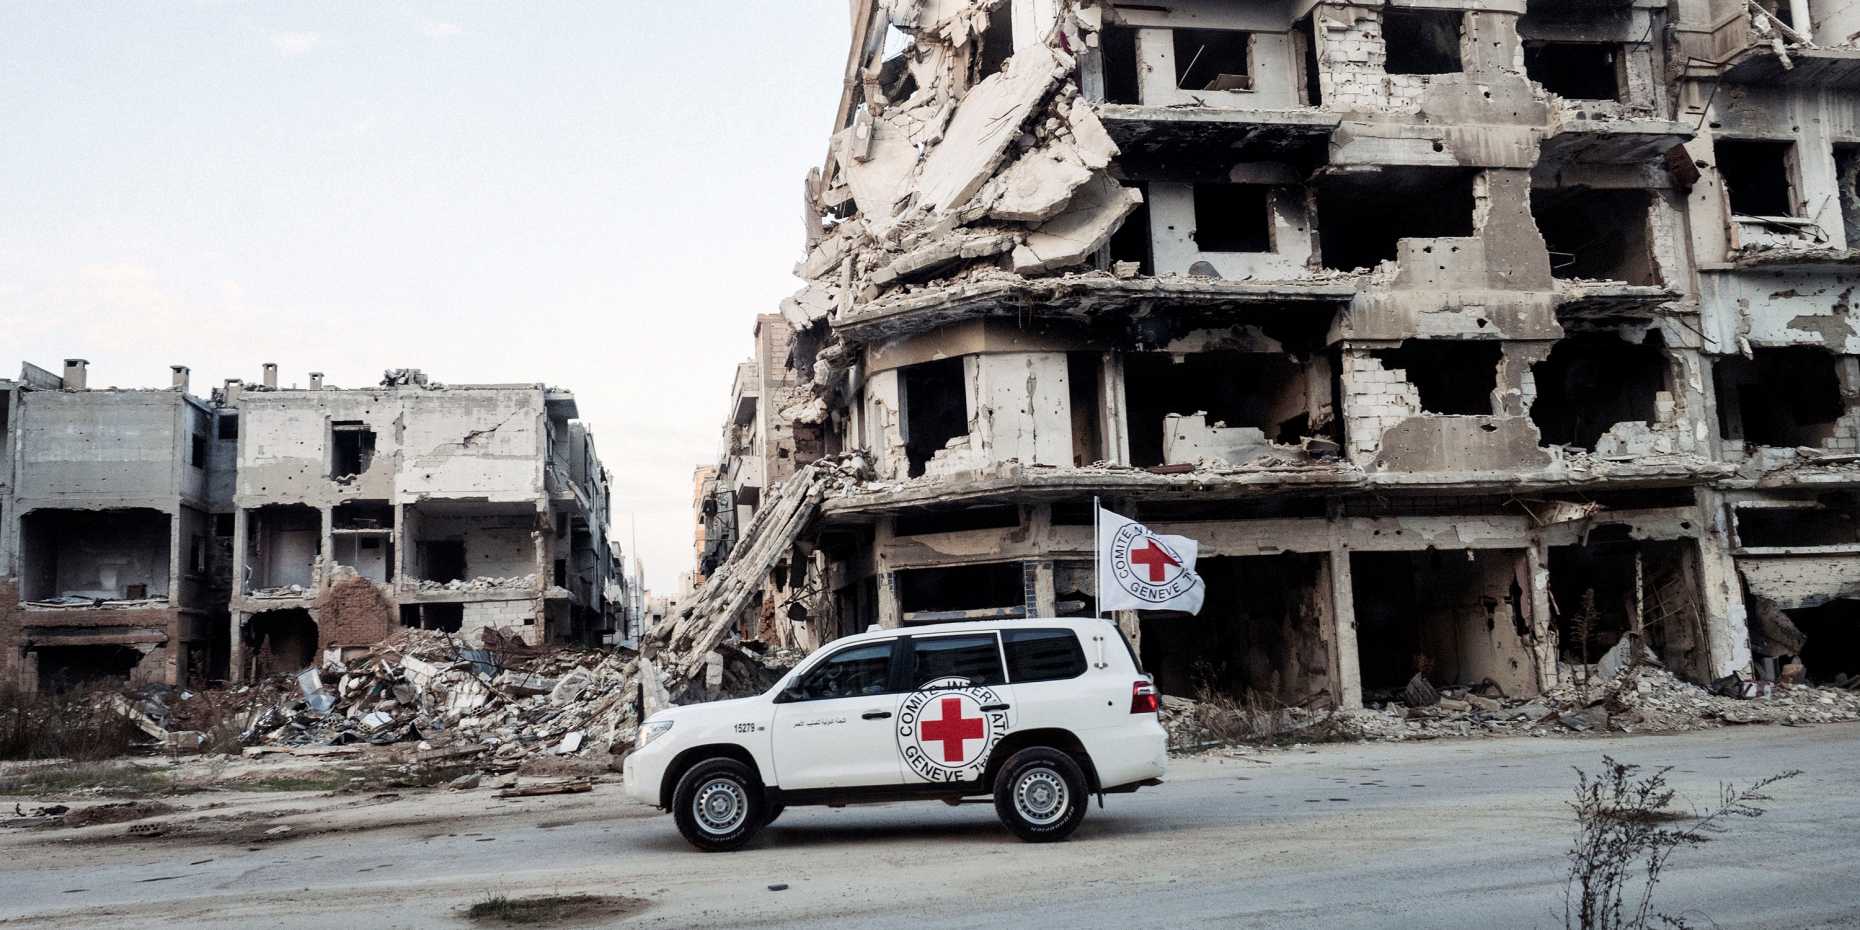 ICRC car in front of demolished building